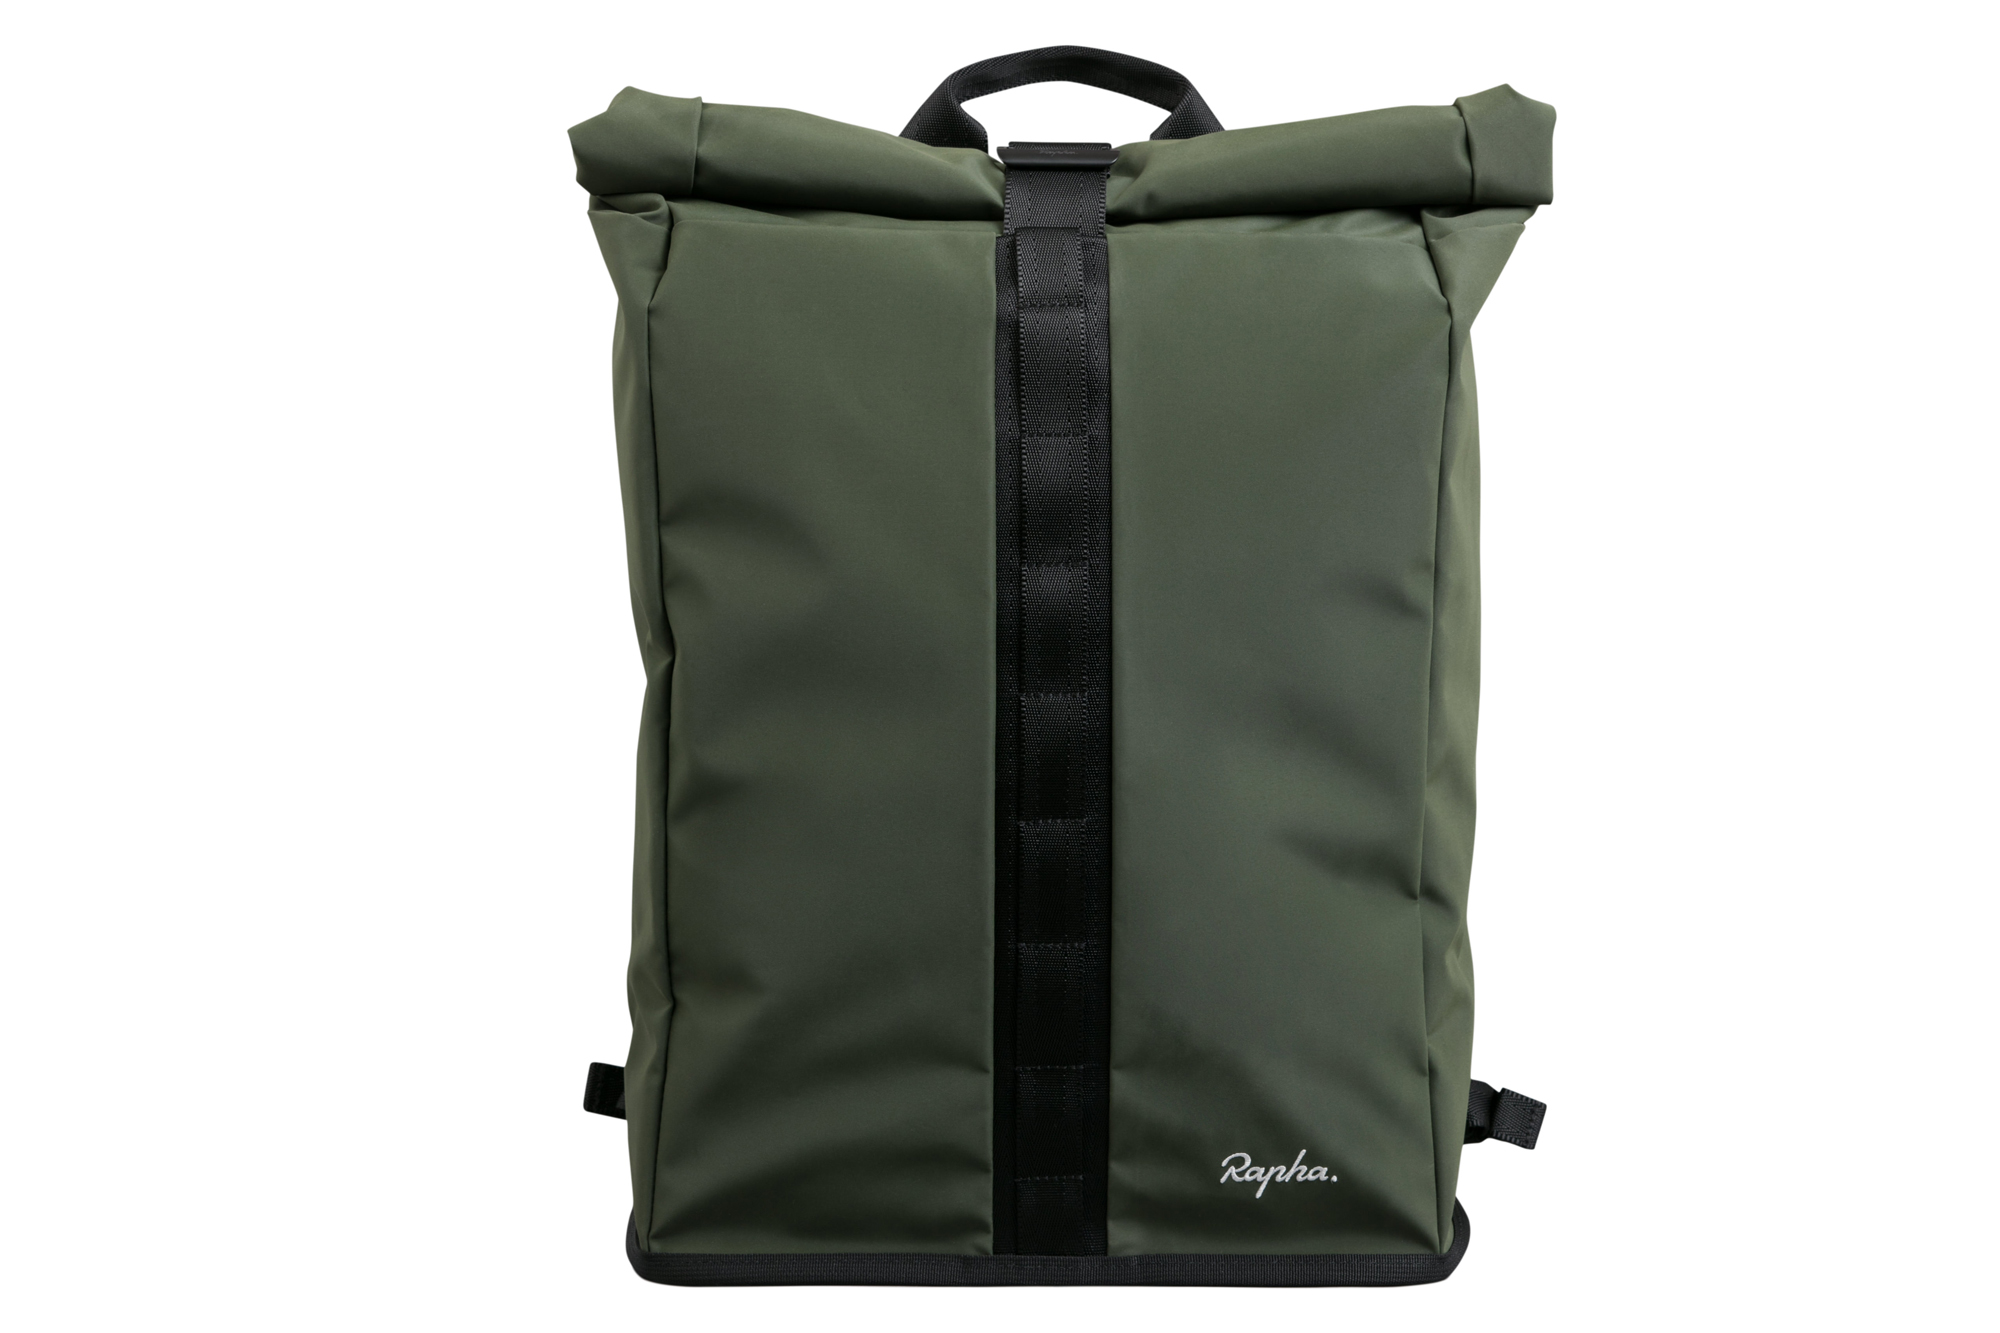 rapha small travel backpack review Online Sale